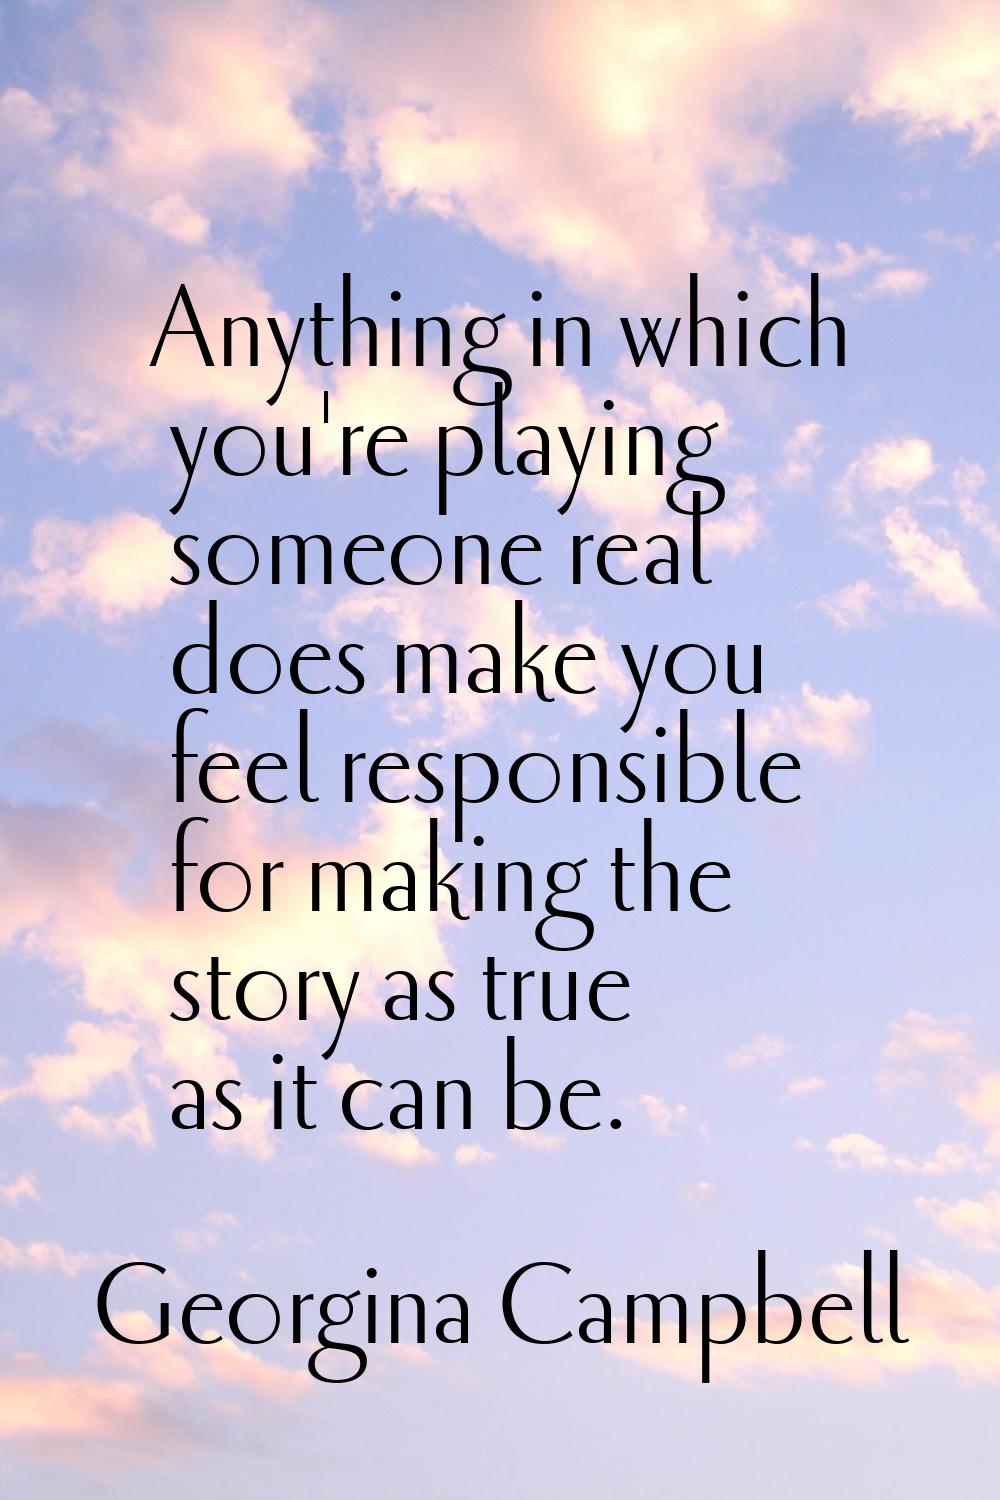 Anything in which you're playing someone real does make you feel responsible for making the story a